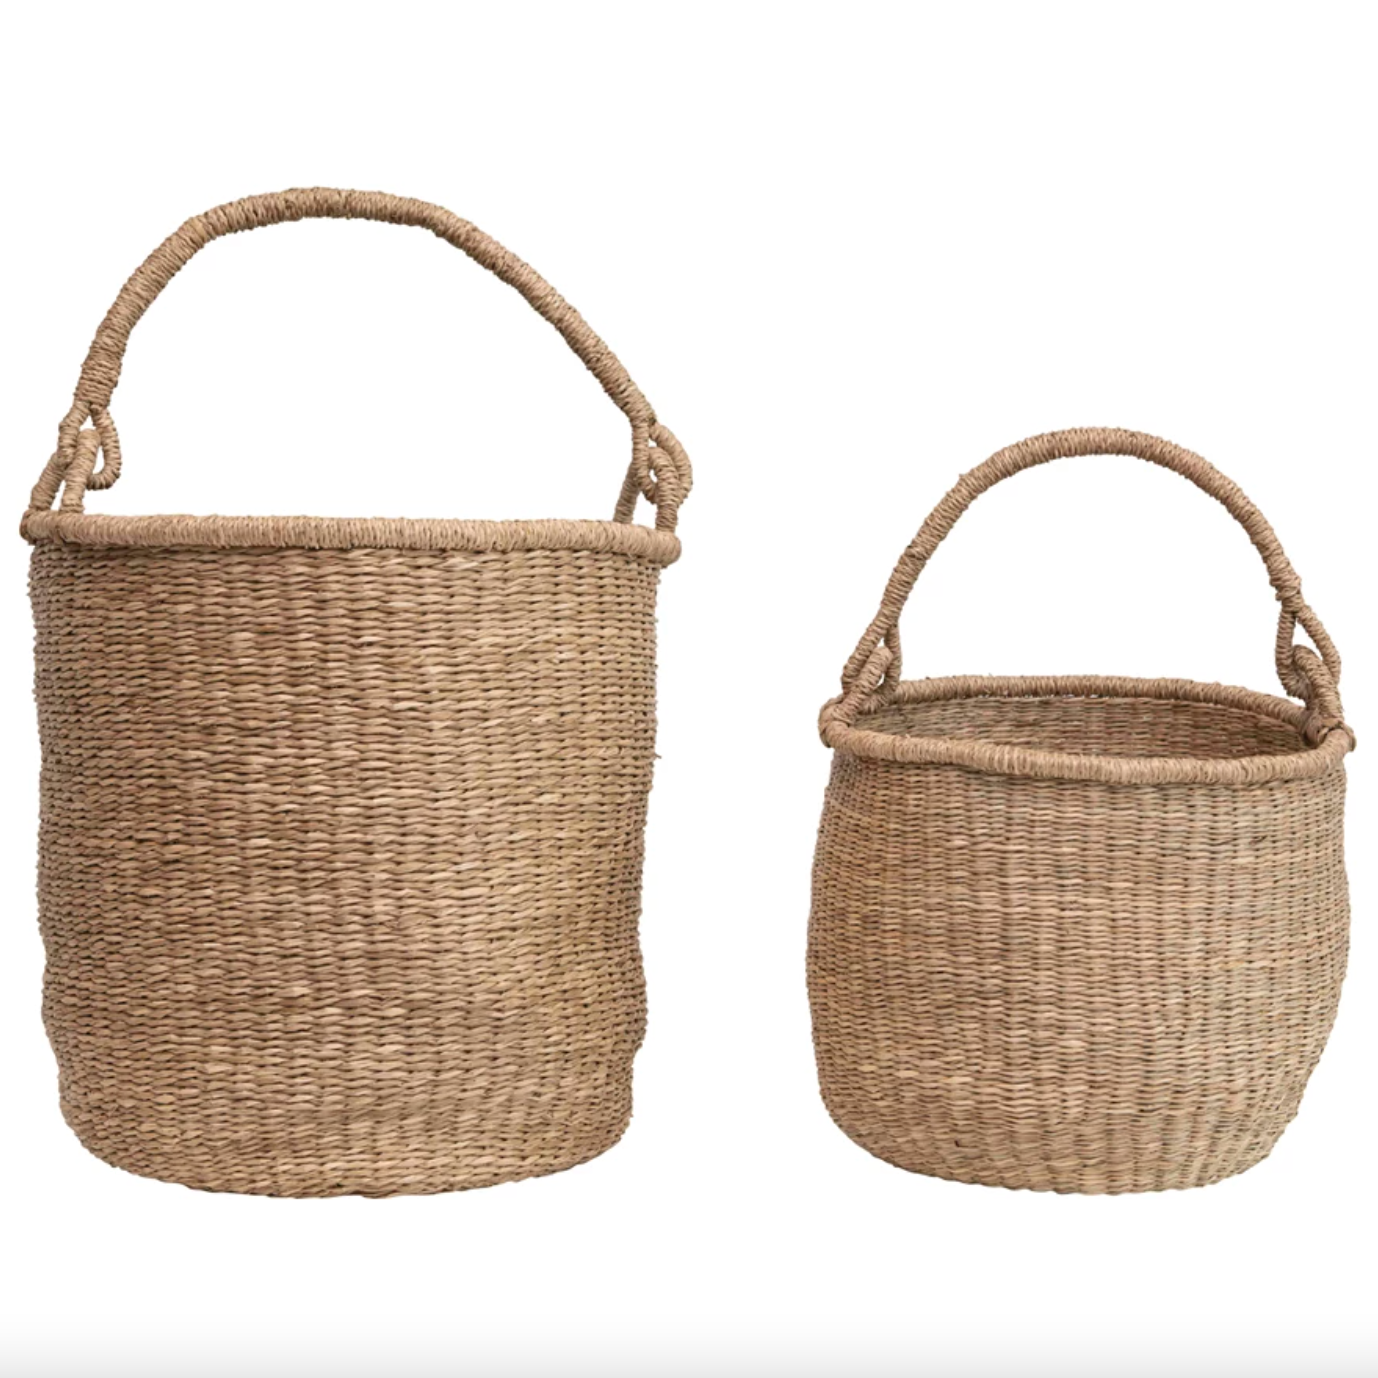 Hand-Woven Baskets with Handle, Set of 2